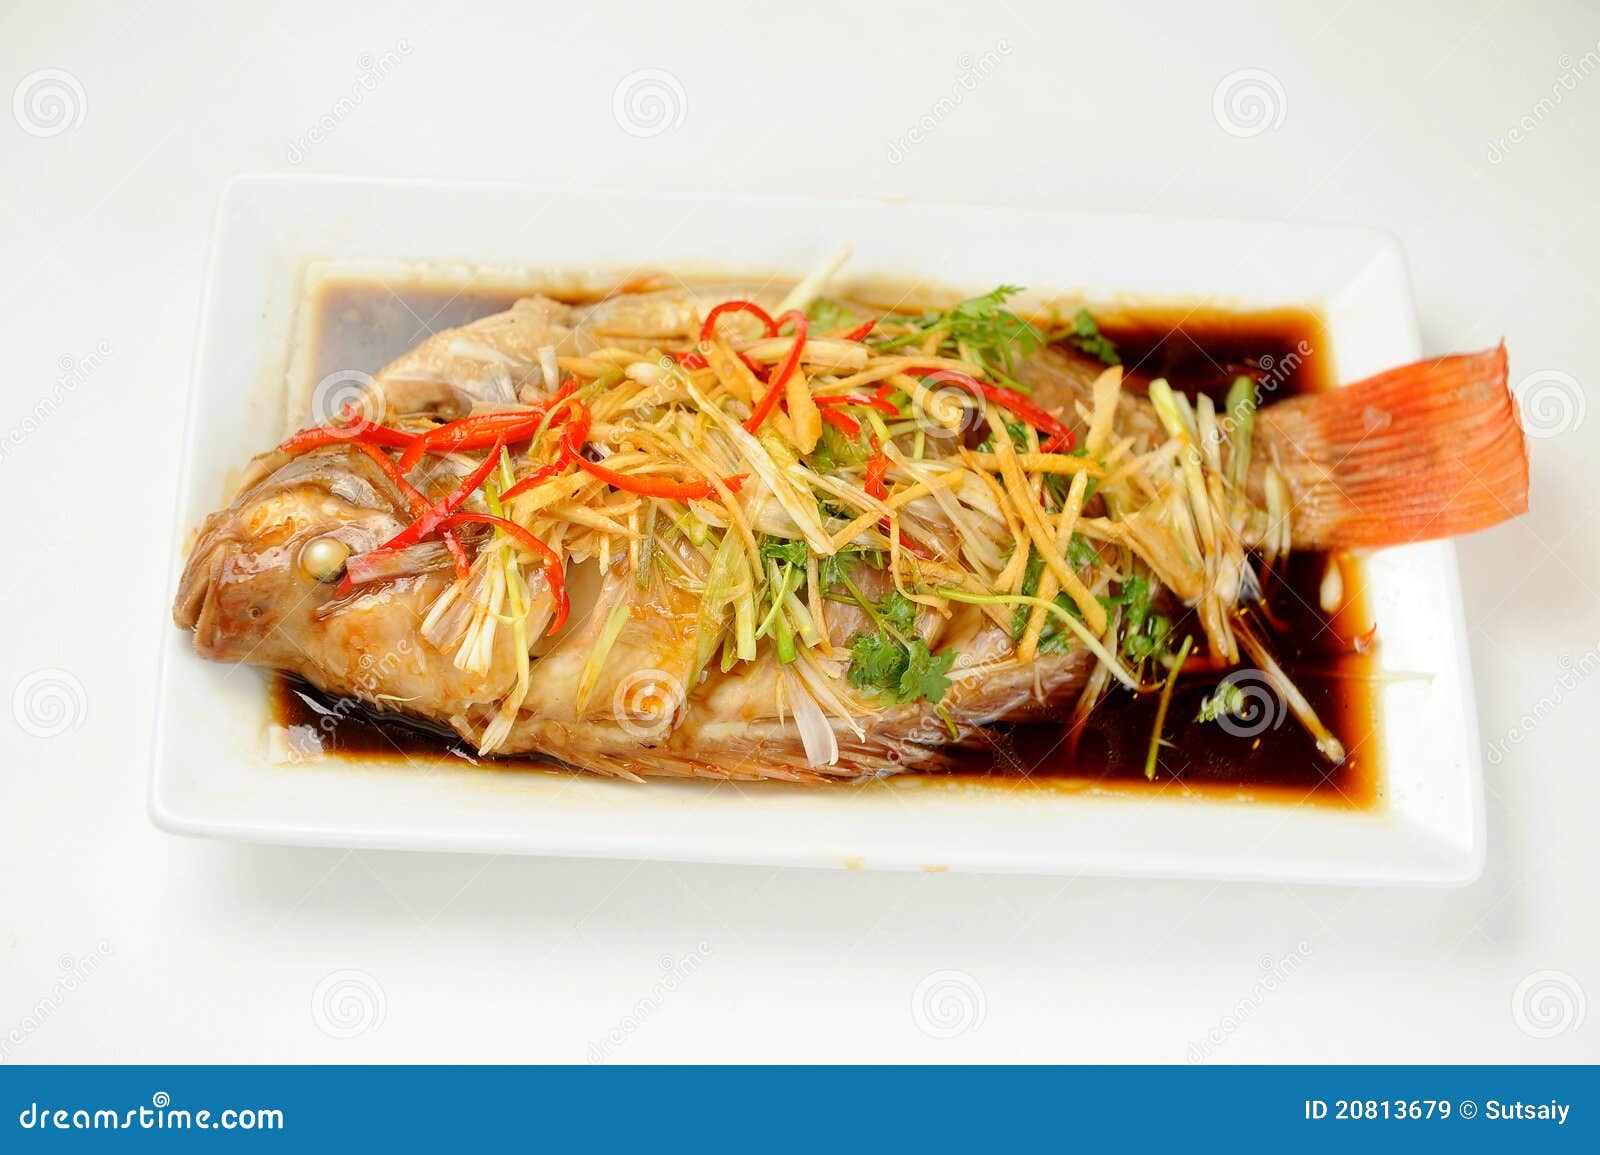 chinese style marinated steamed fish